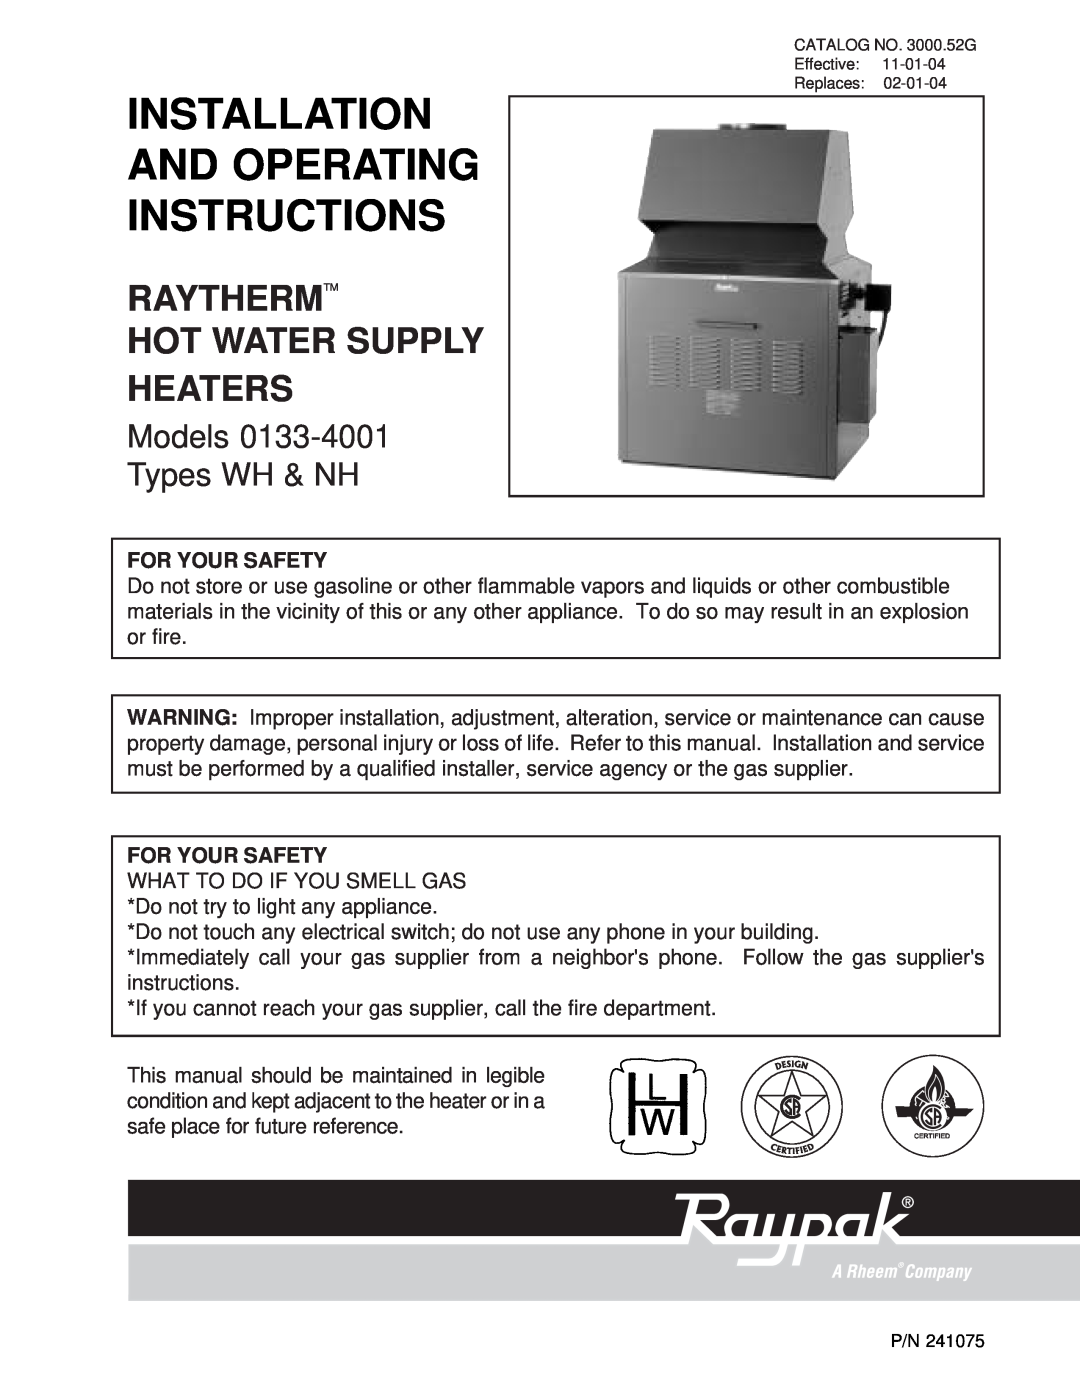 Raypak 0133-4001 WH manual For Your Safety, Installation And Operating Instructions, Raythermtm Hot Water Supply Heaters 